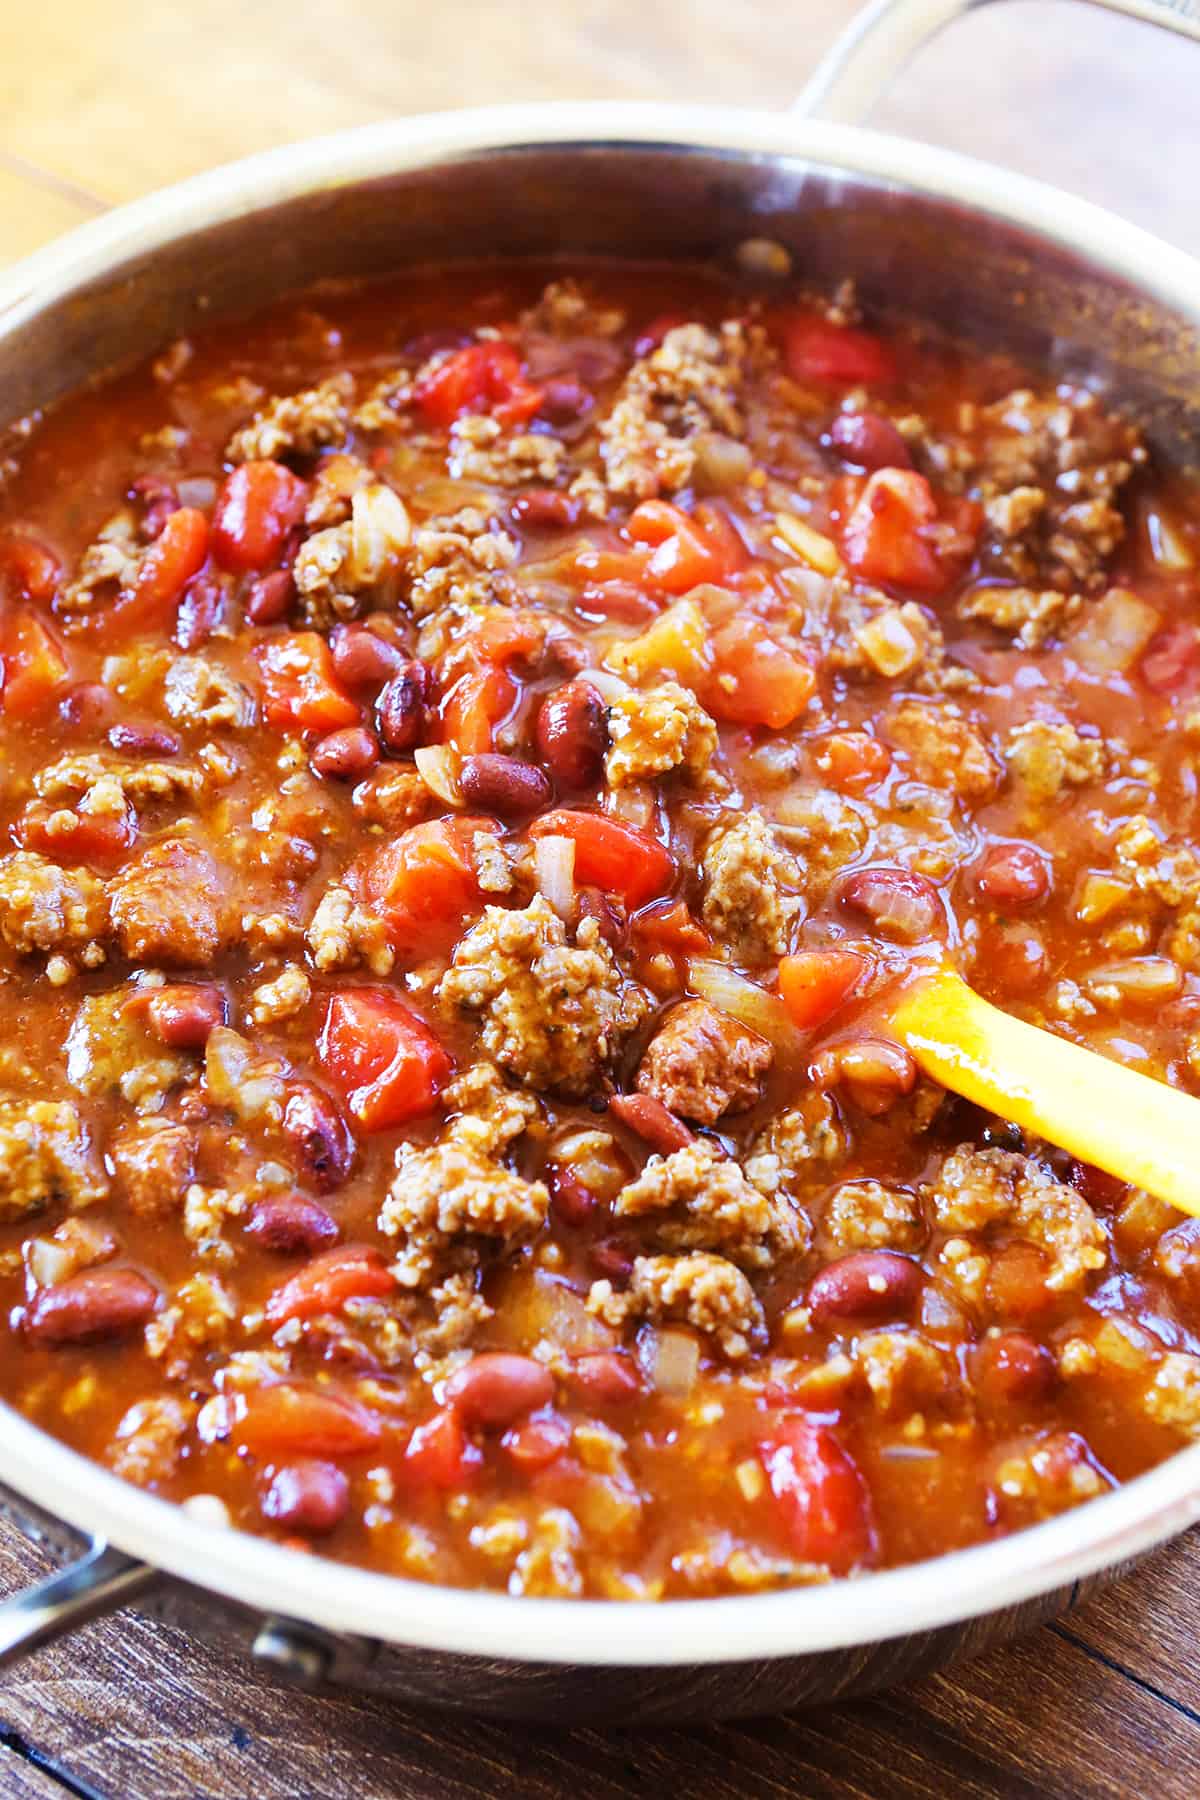 Skillet full of chili with beans.